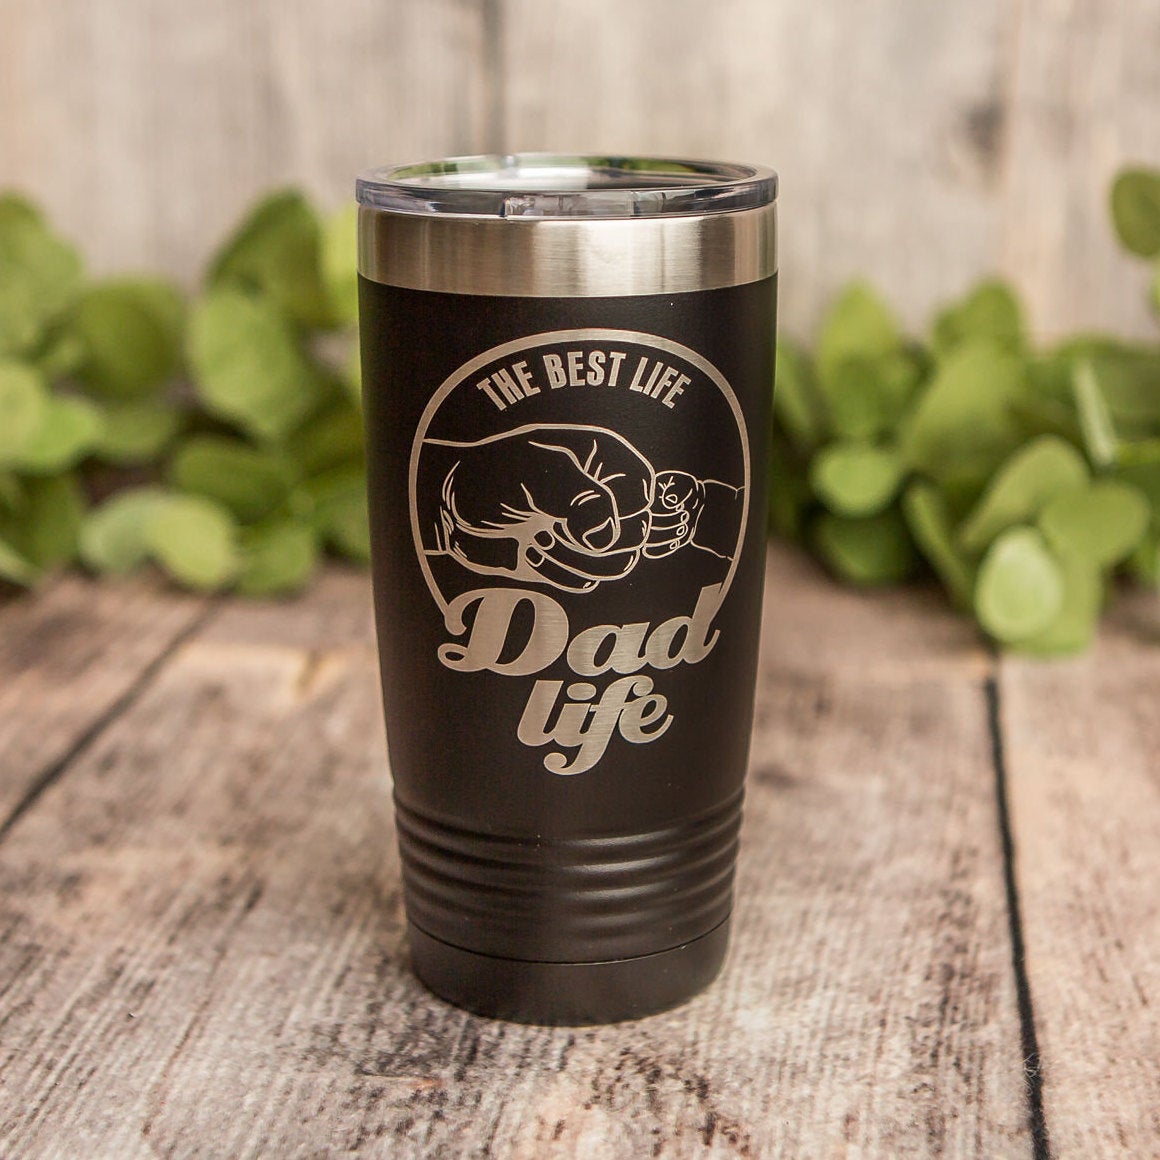 https://3cetching.com/wp-content/uploads/2020/09/dad-life-engraved-tumbler-yeti-style-cup-gift-for-him-5f5fb7d8.jpg